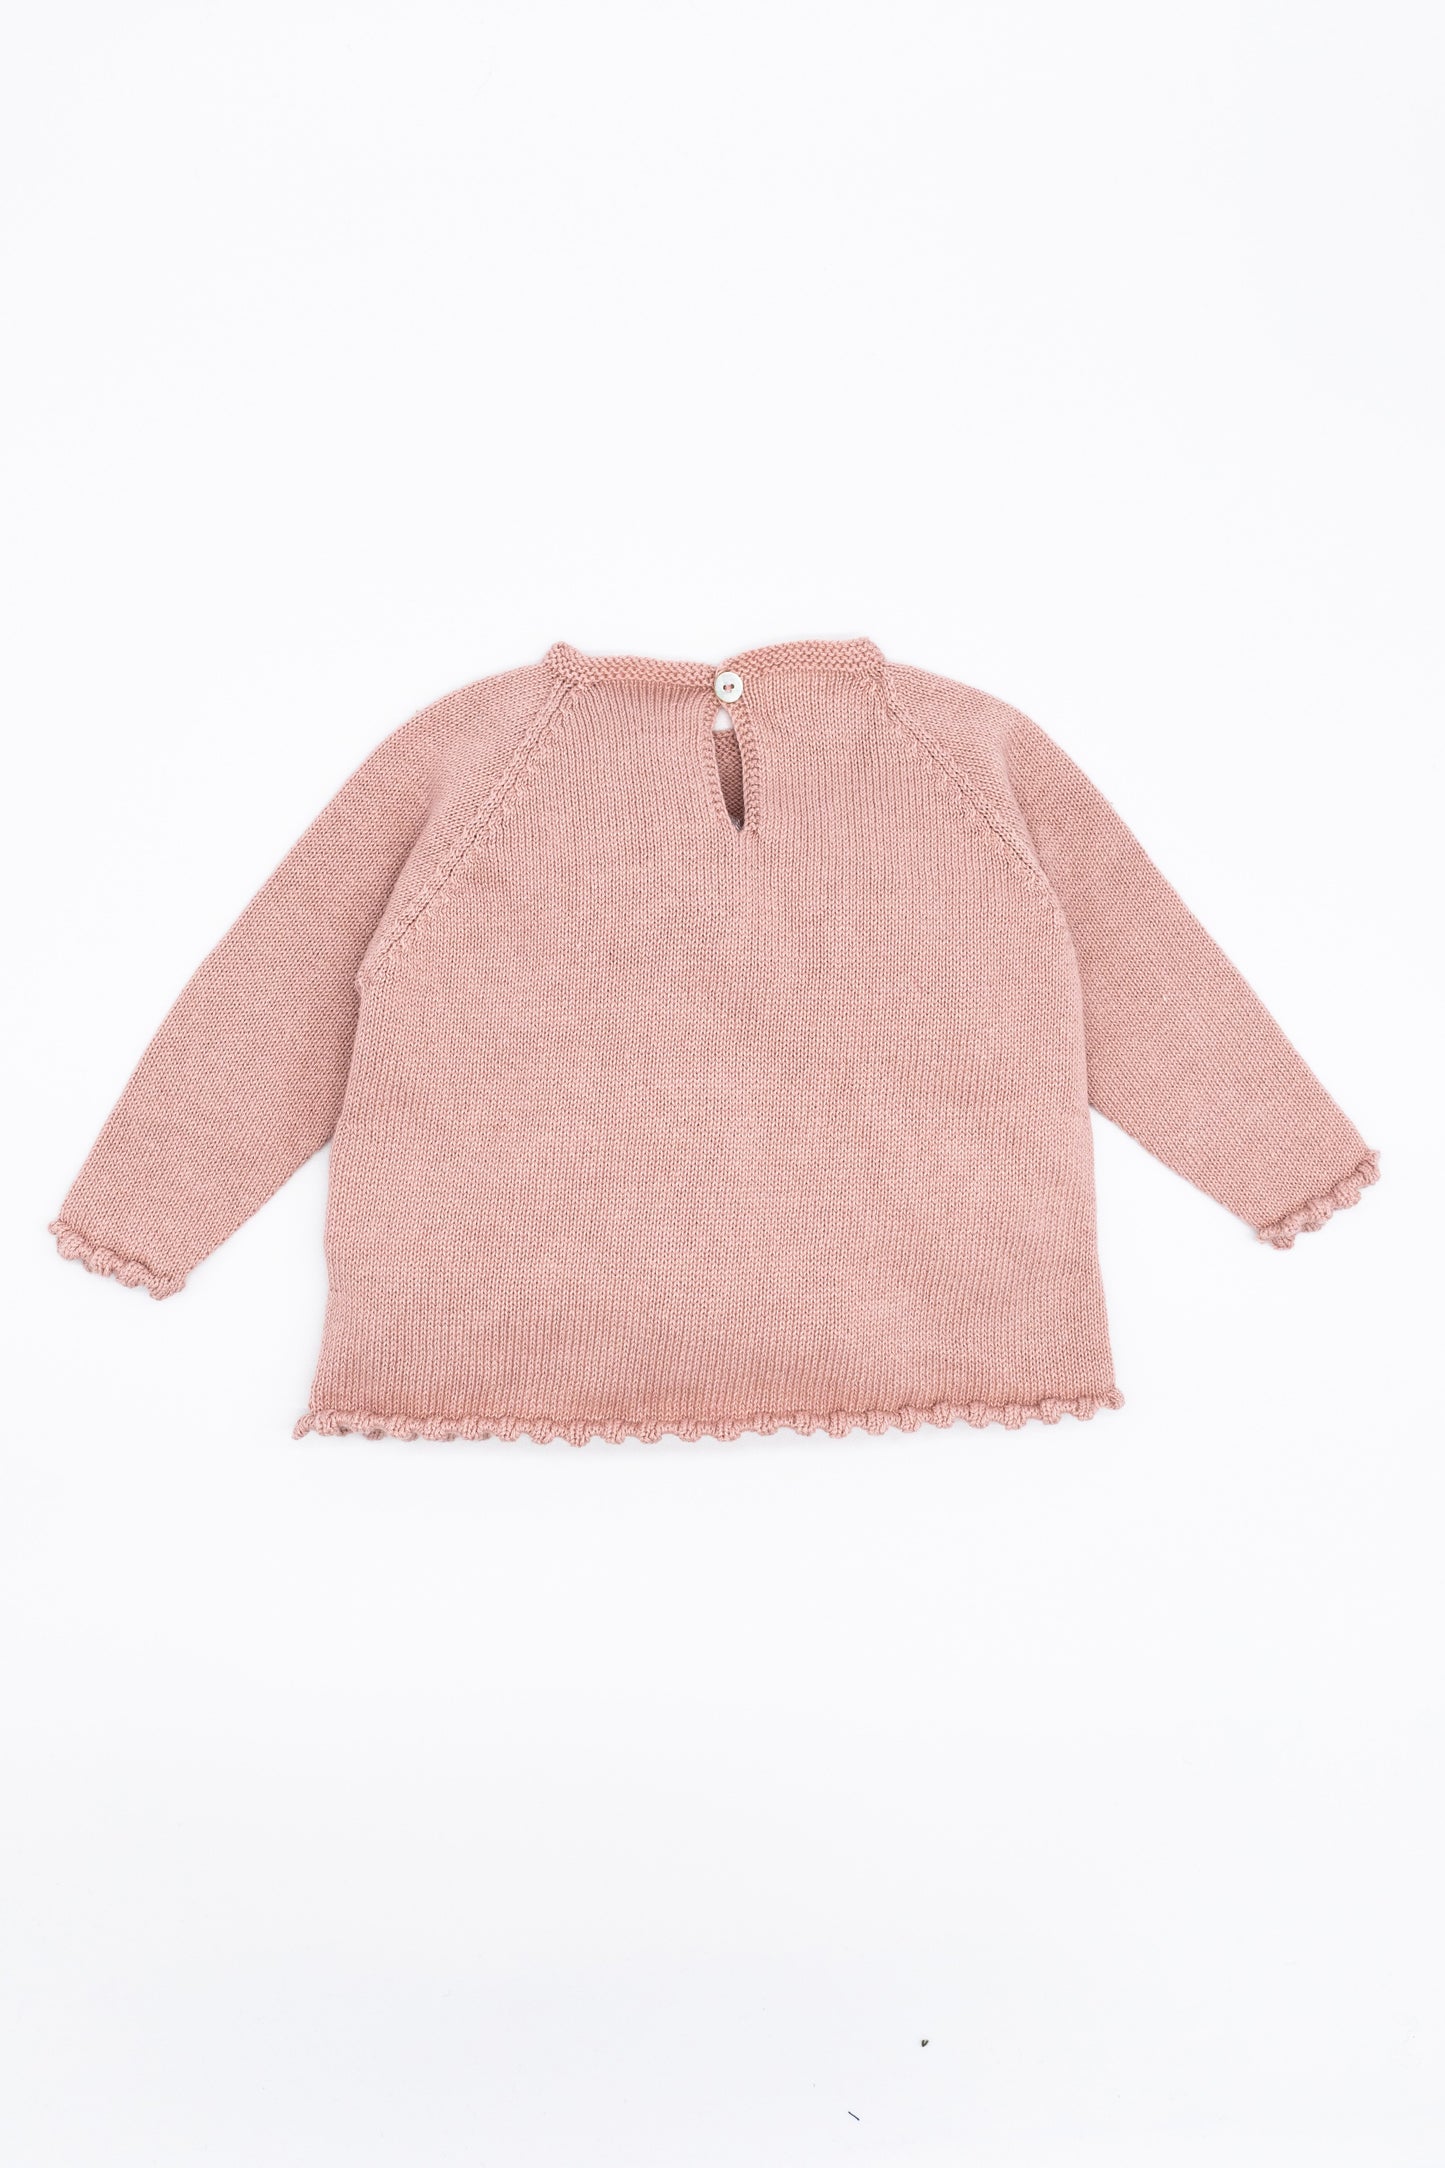 Pink knitted sweater made of merino wool